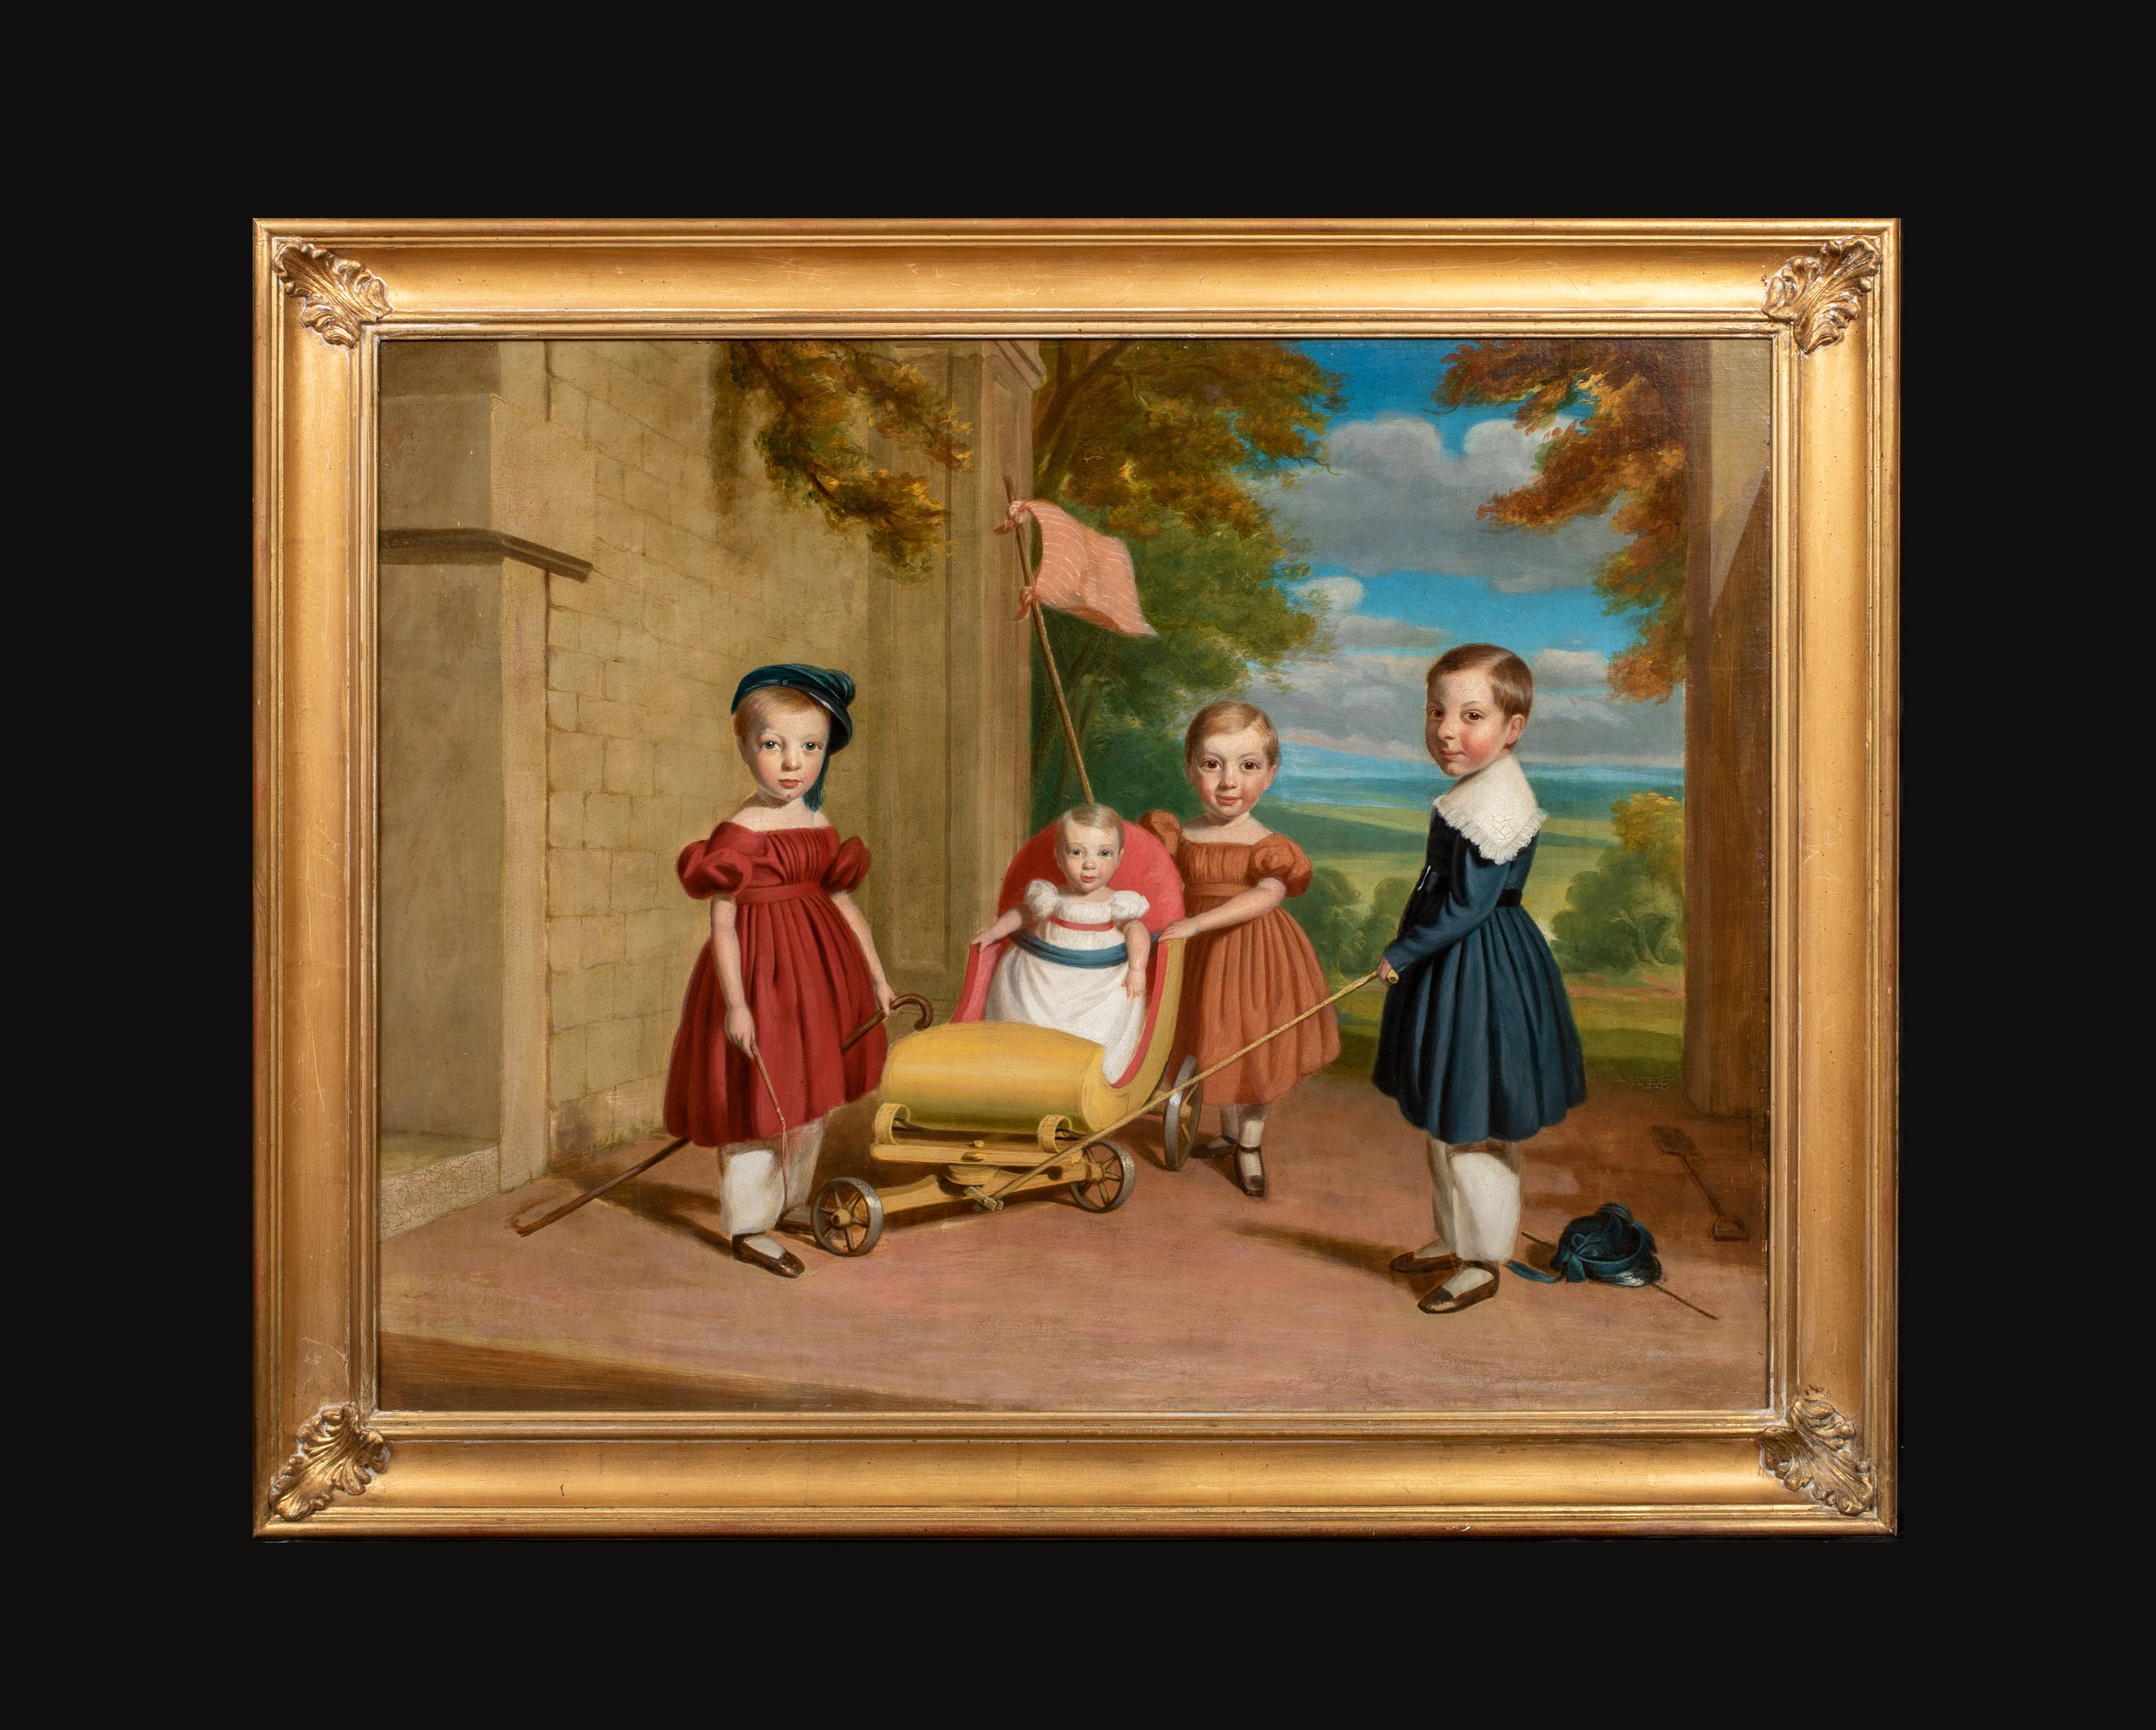 Portrait Of Children Playing, 19th Century American School - Painting by Unknown